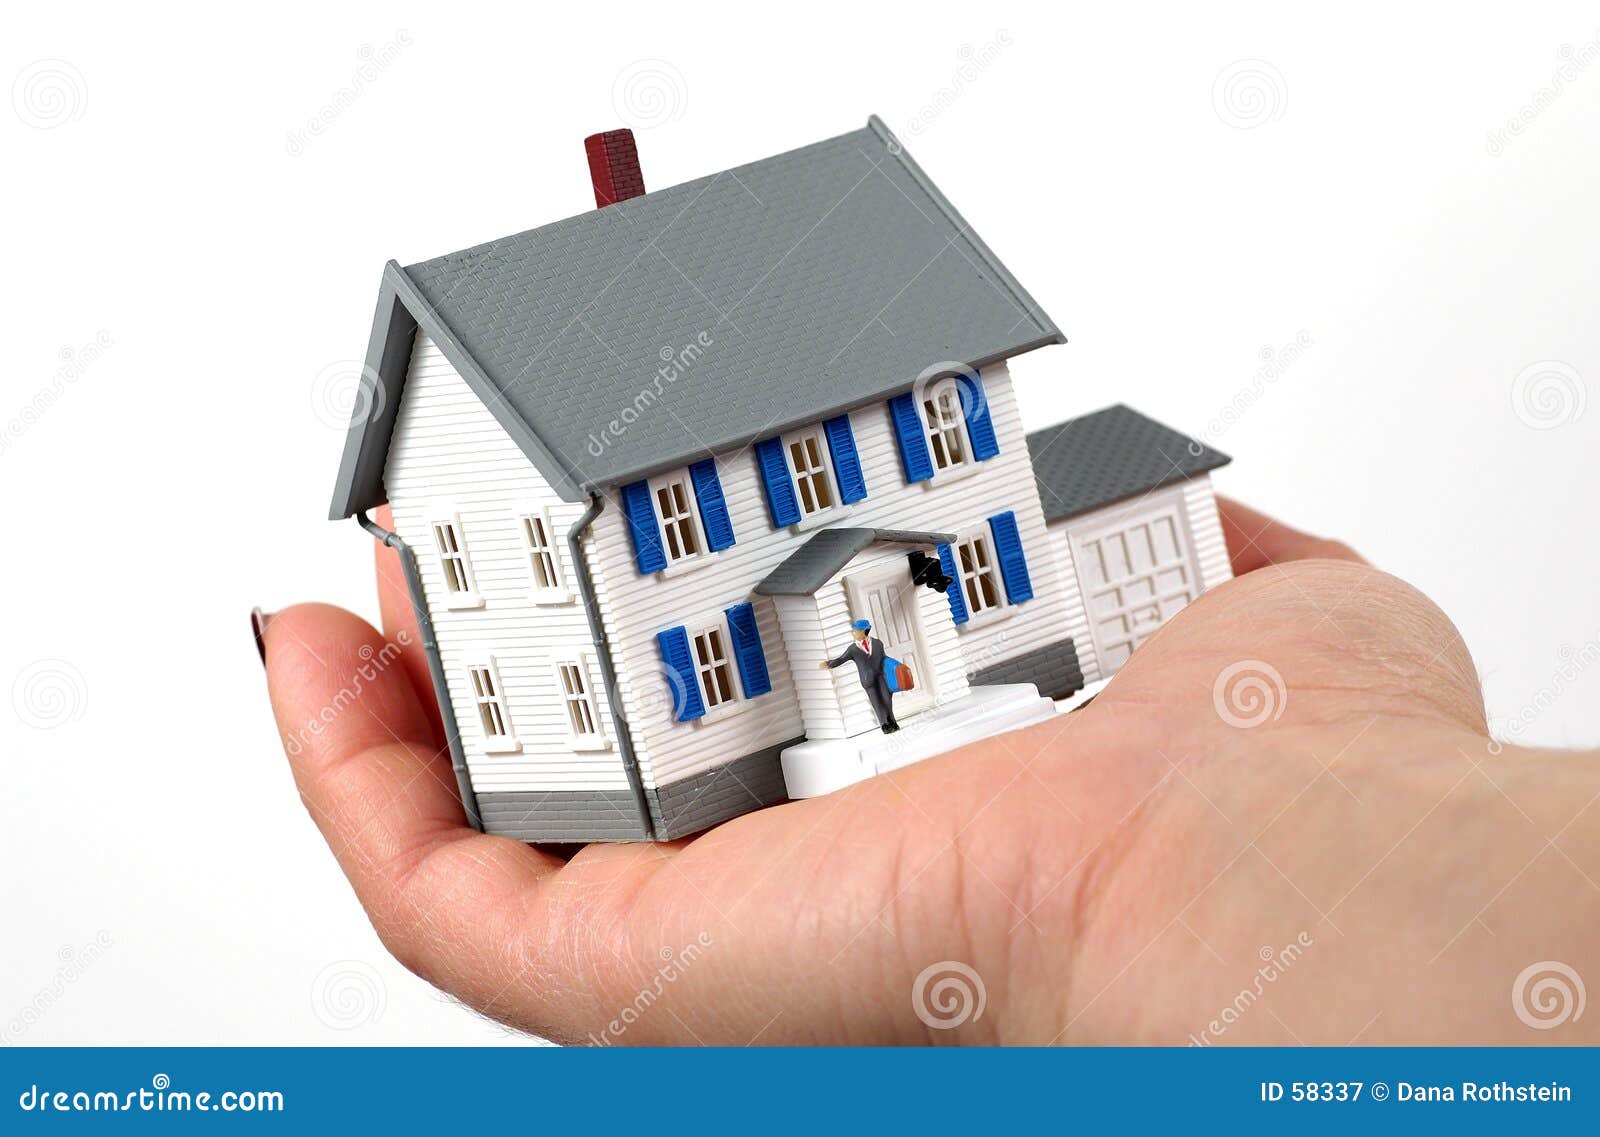 Real Estate Royalty Free Stock Photography - Image: 58337